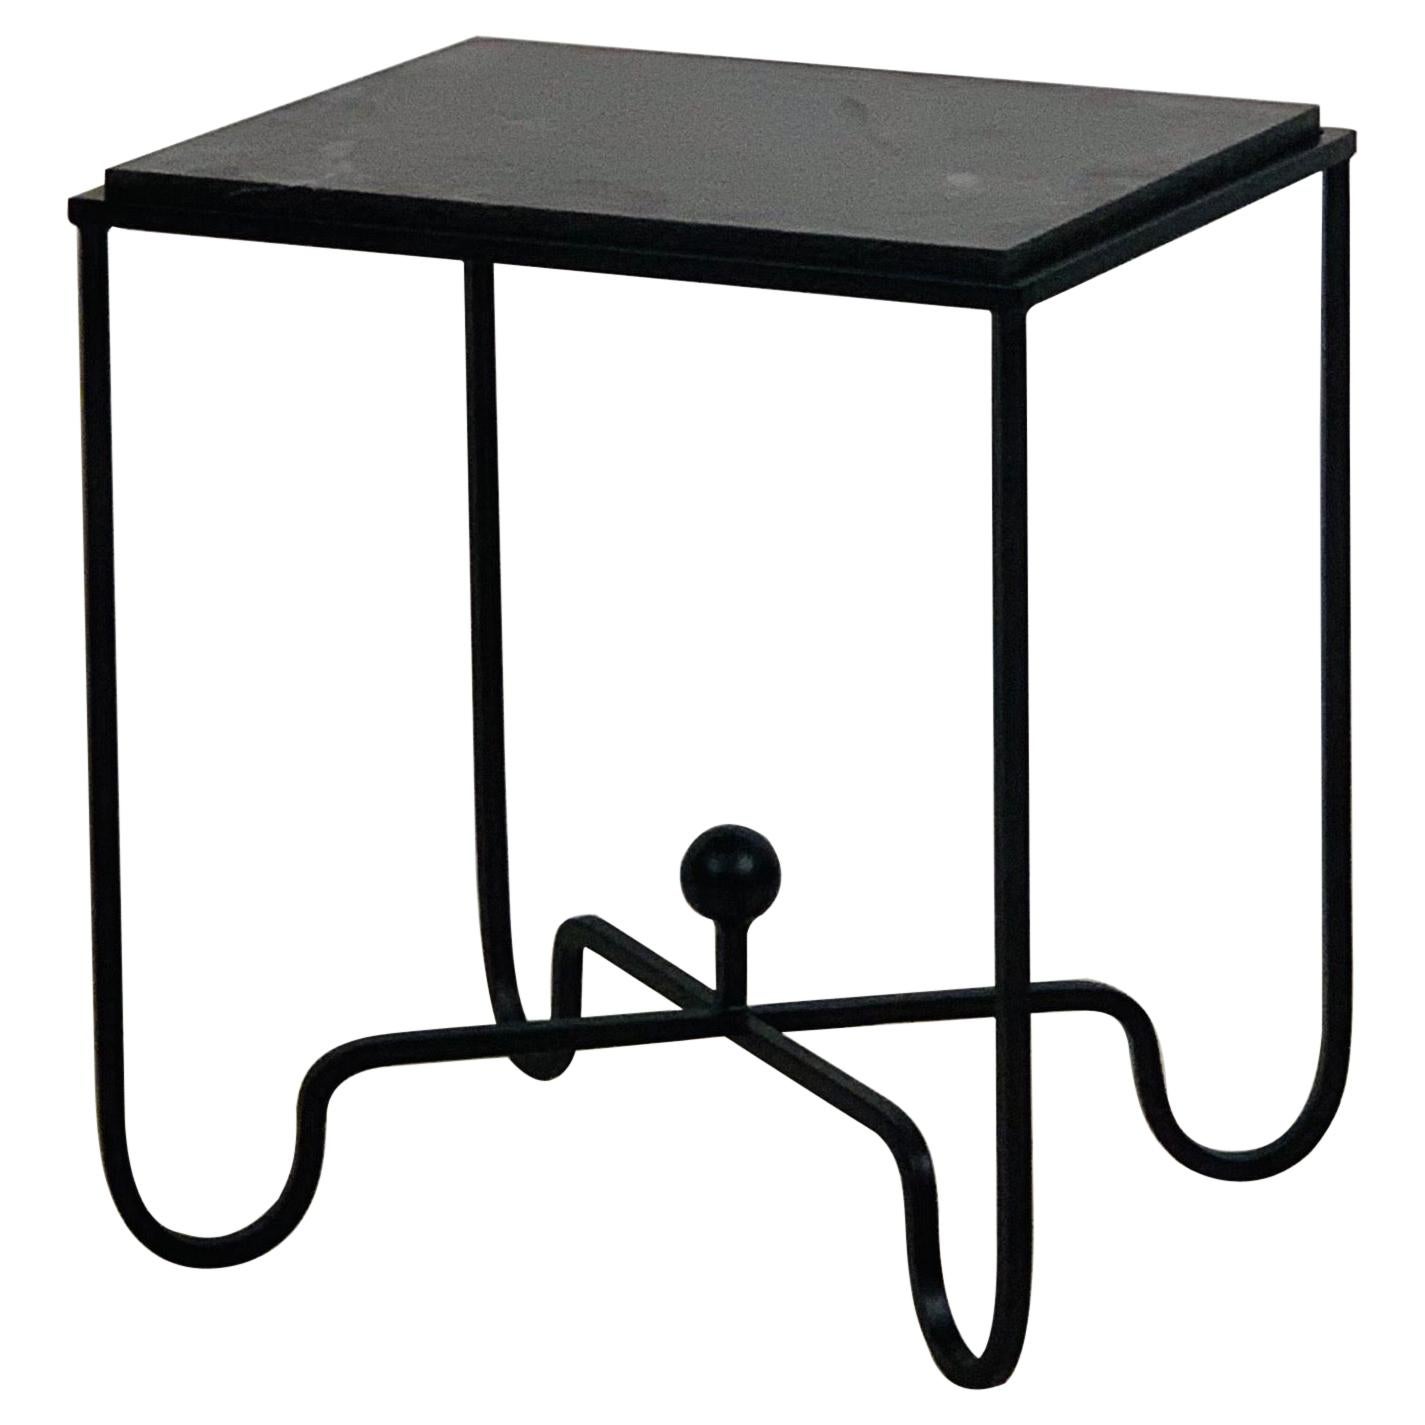 Chic 'Entretoise' Black Limestone Side Table by Design Frères For Sale